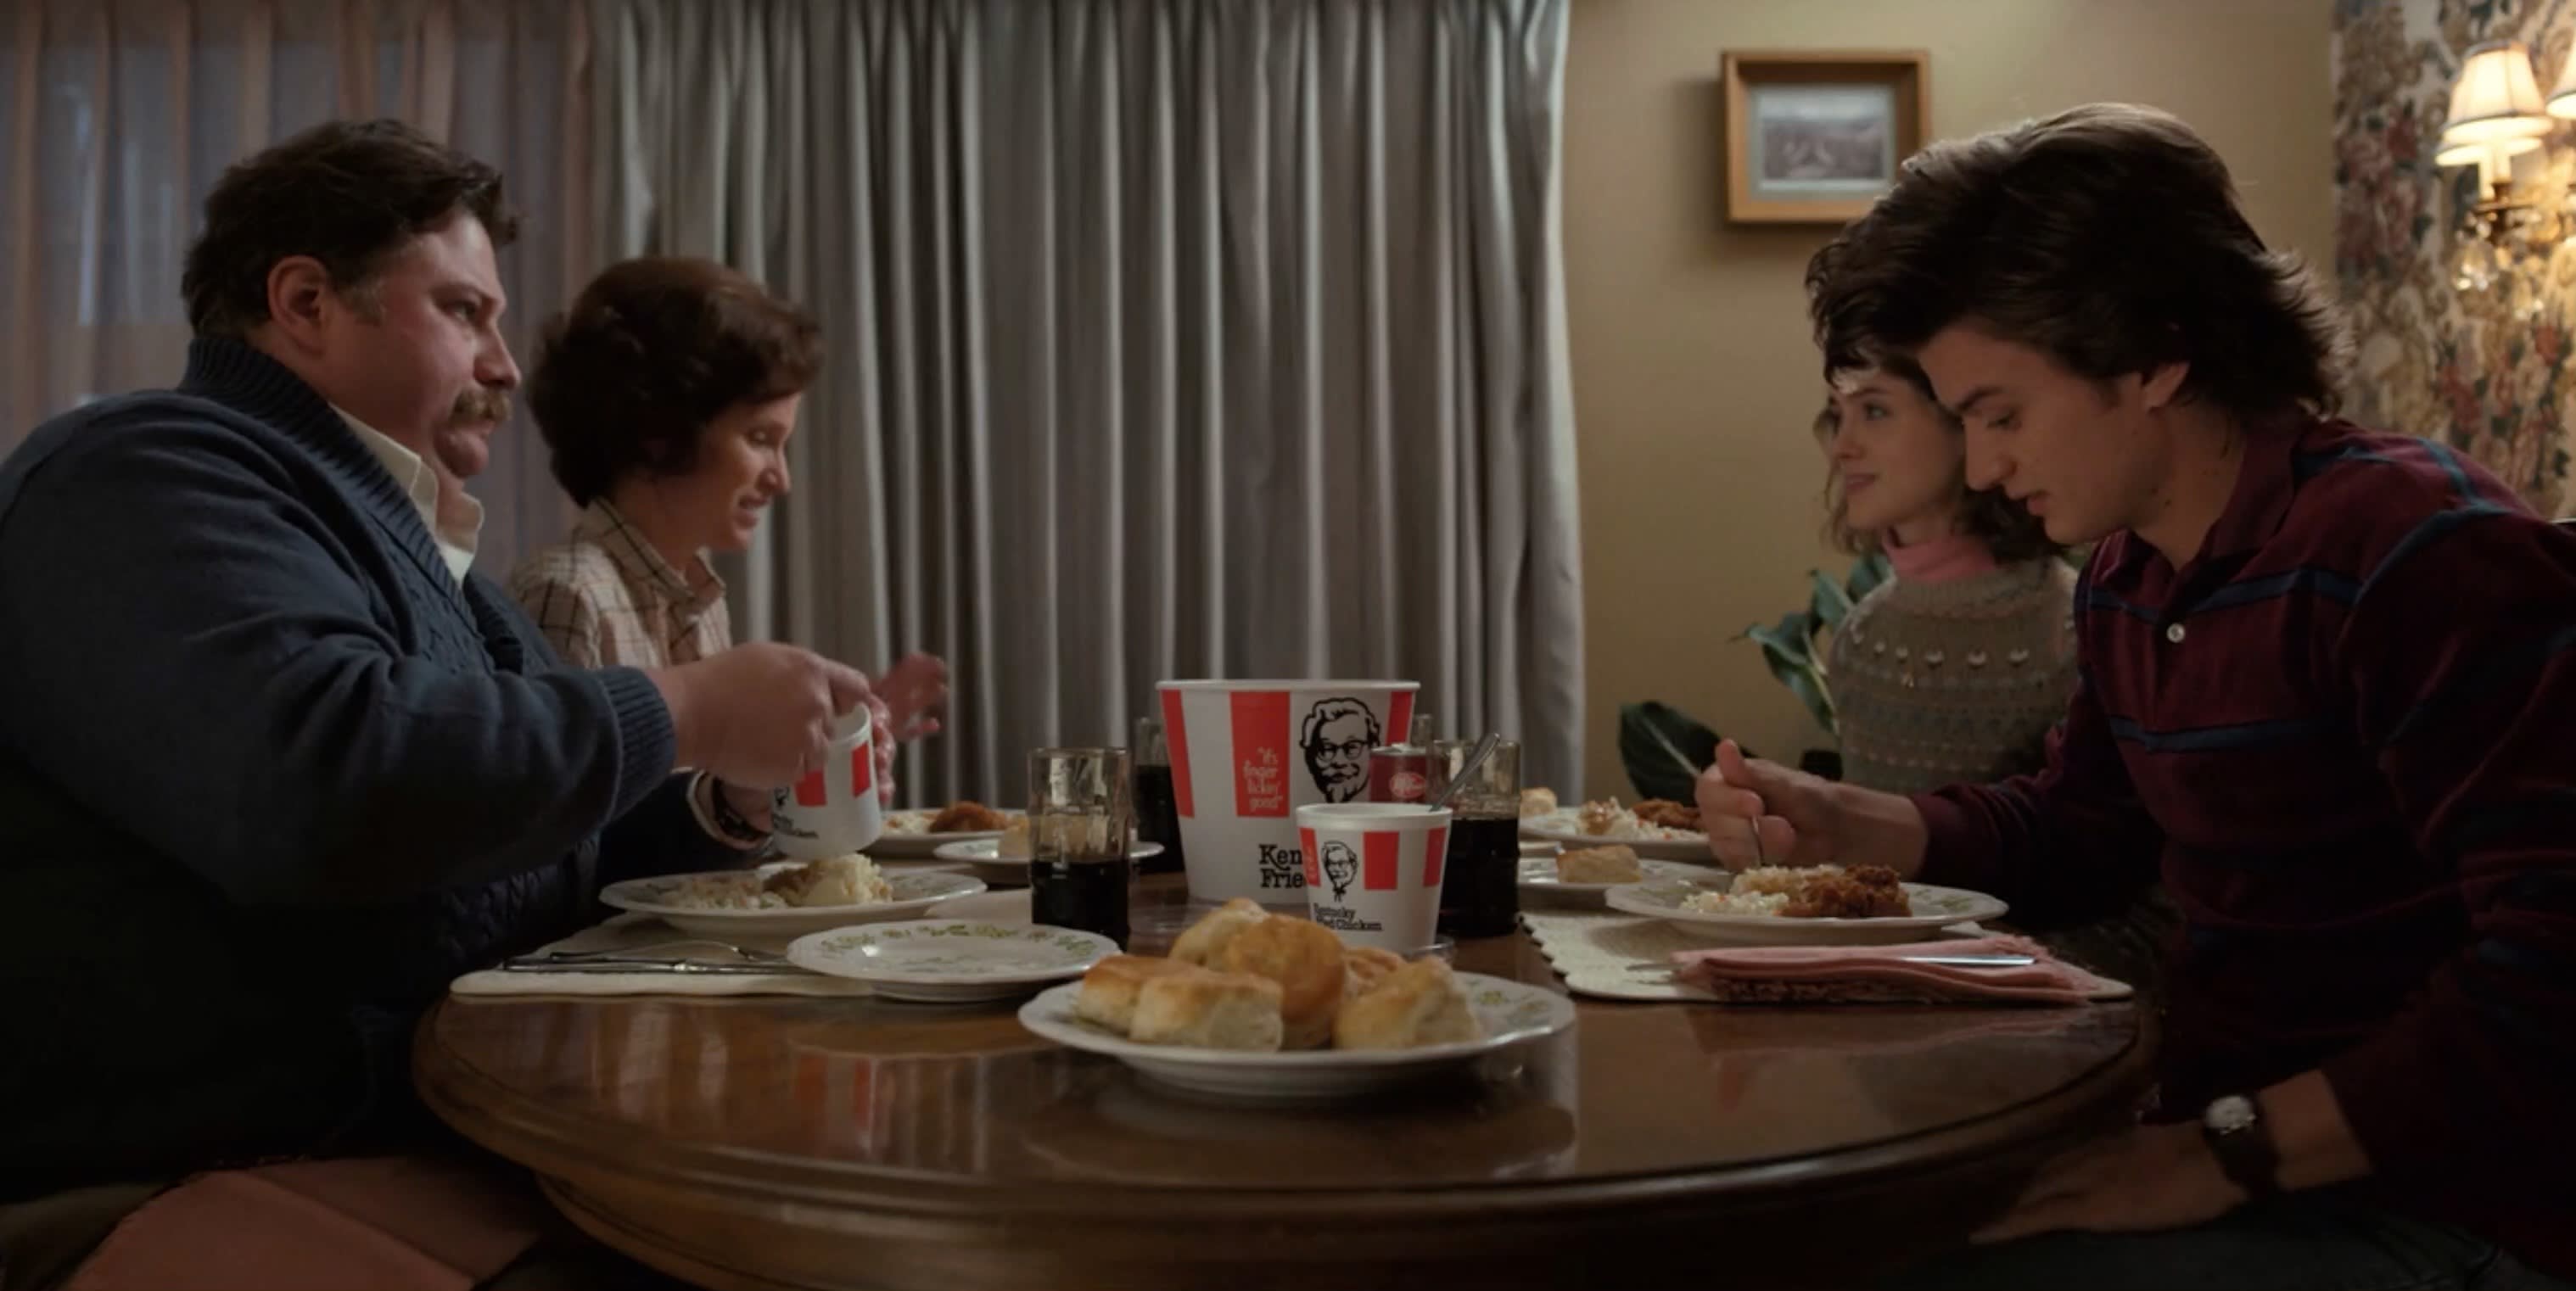 Kfc In Stranger Things Not A Coincidence Netflix Product Placement